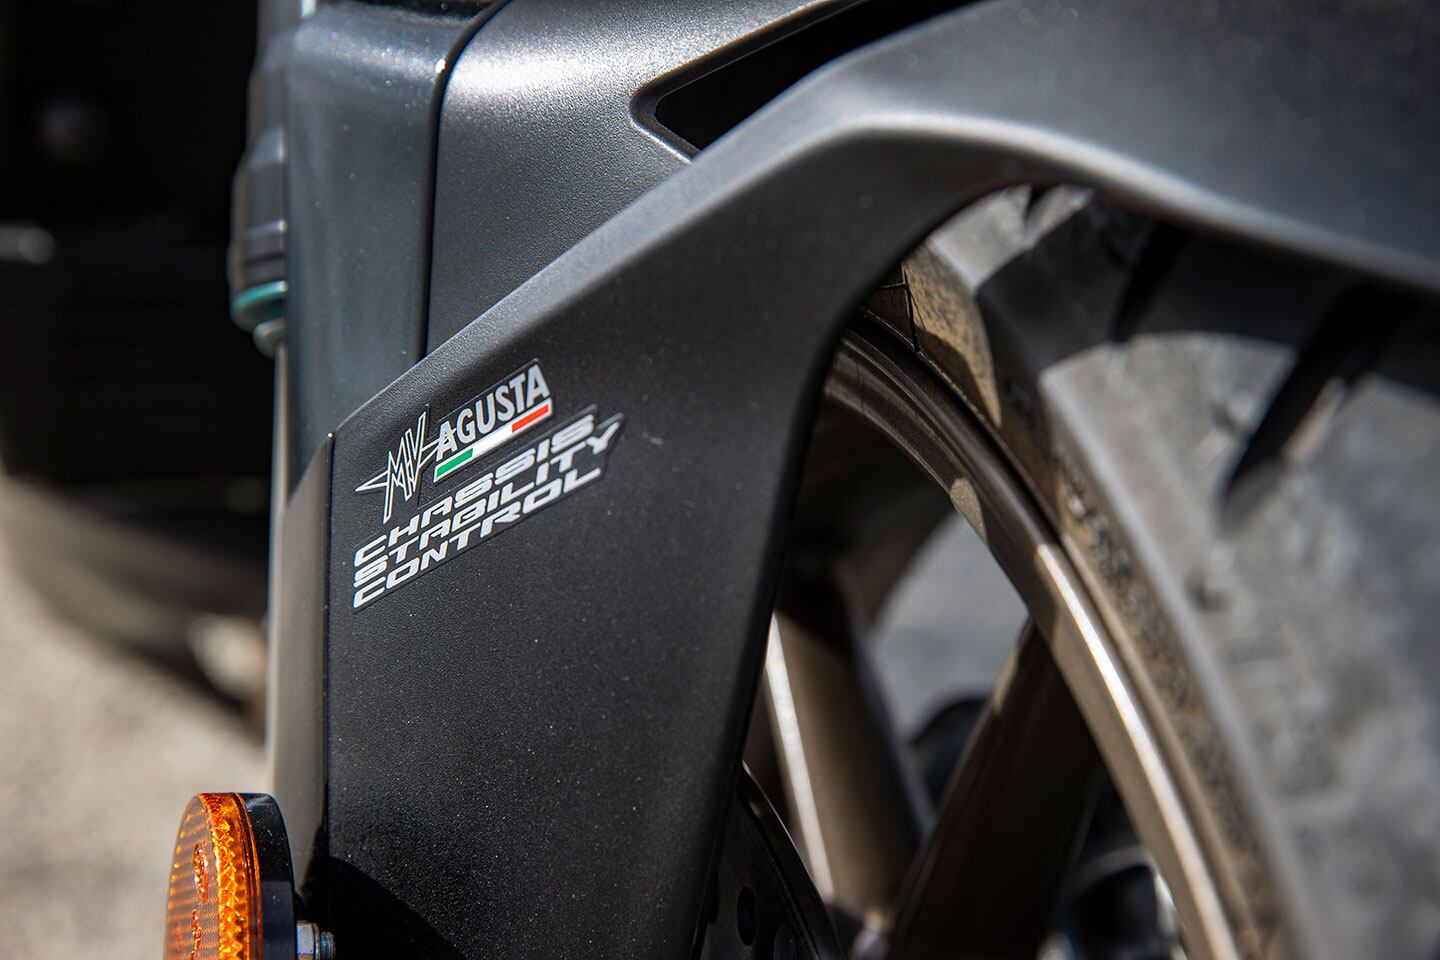 MV Agusta’s semi-active suspension is managed by the company’s Chassis Stability Control system.